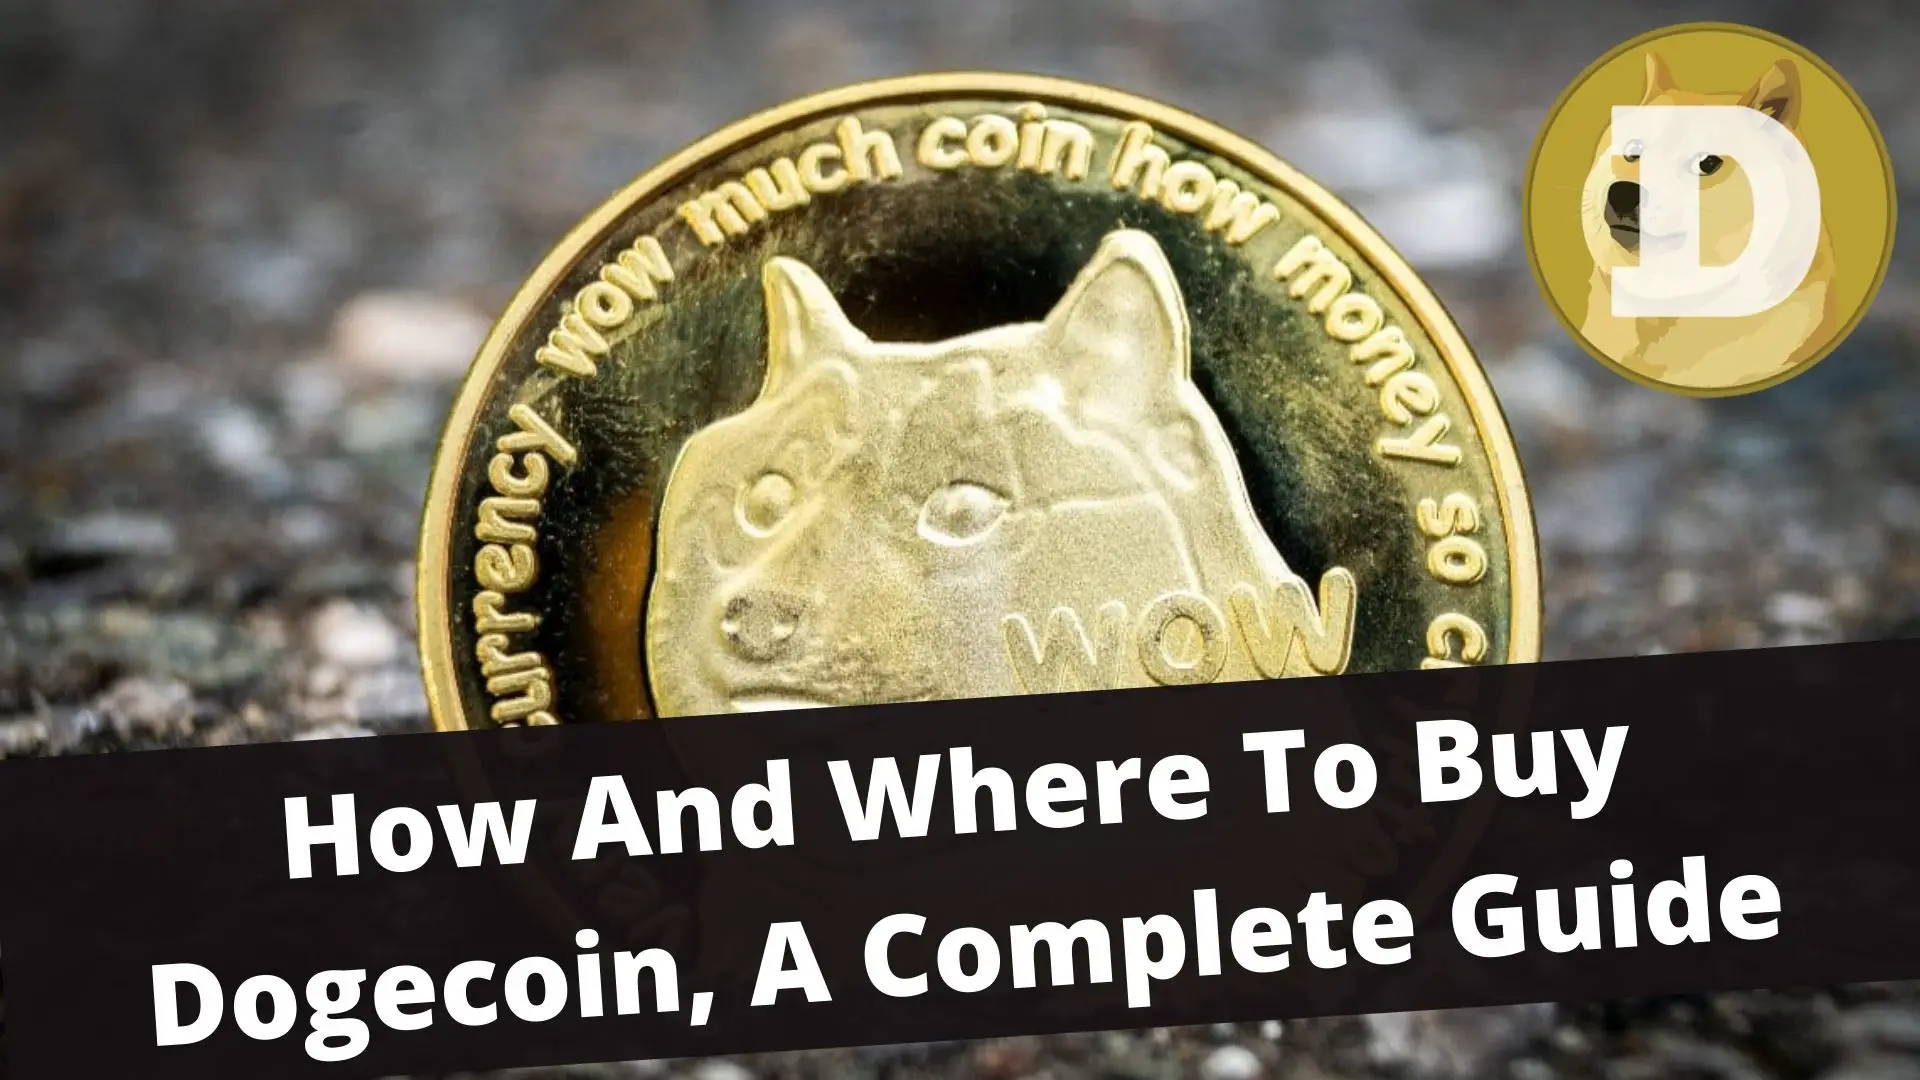 dogecoin should you sell